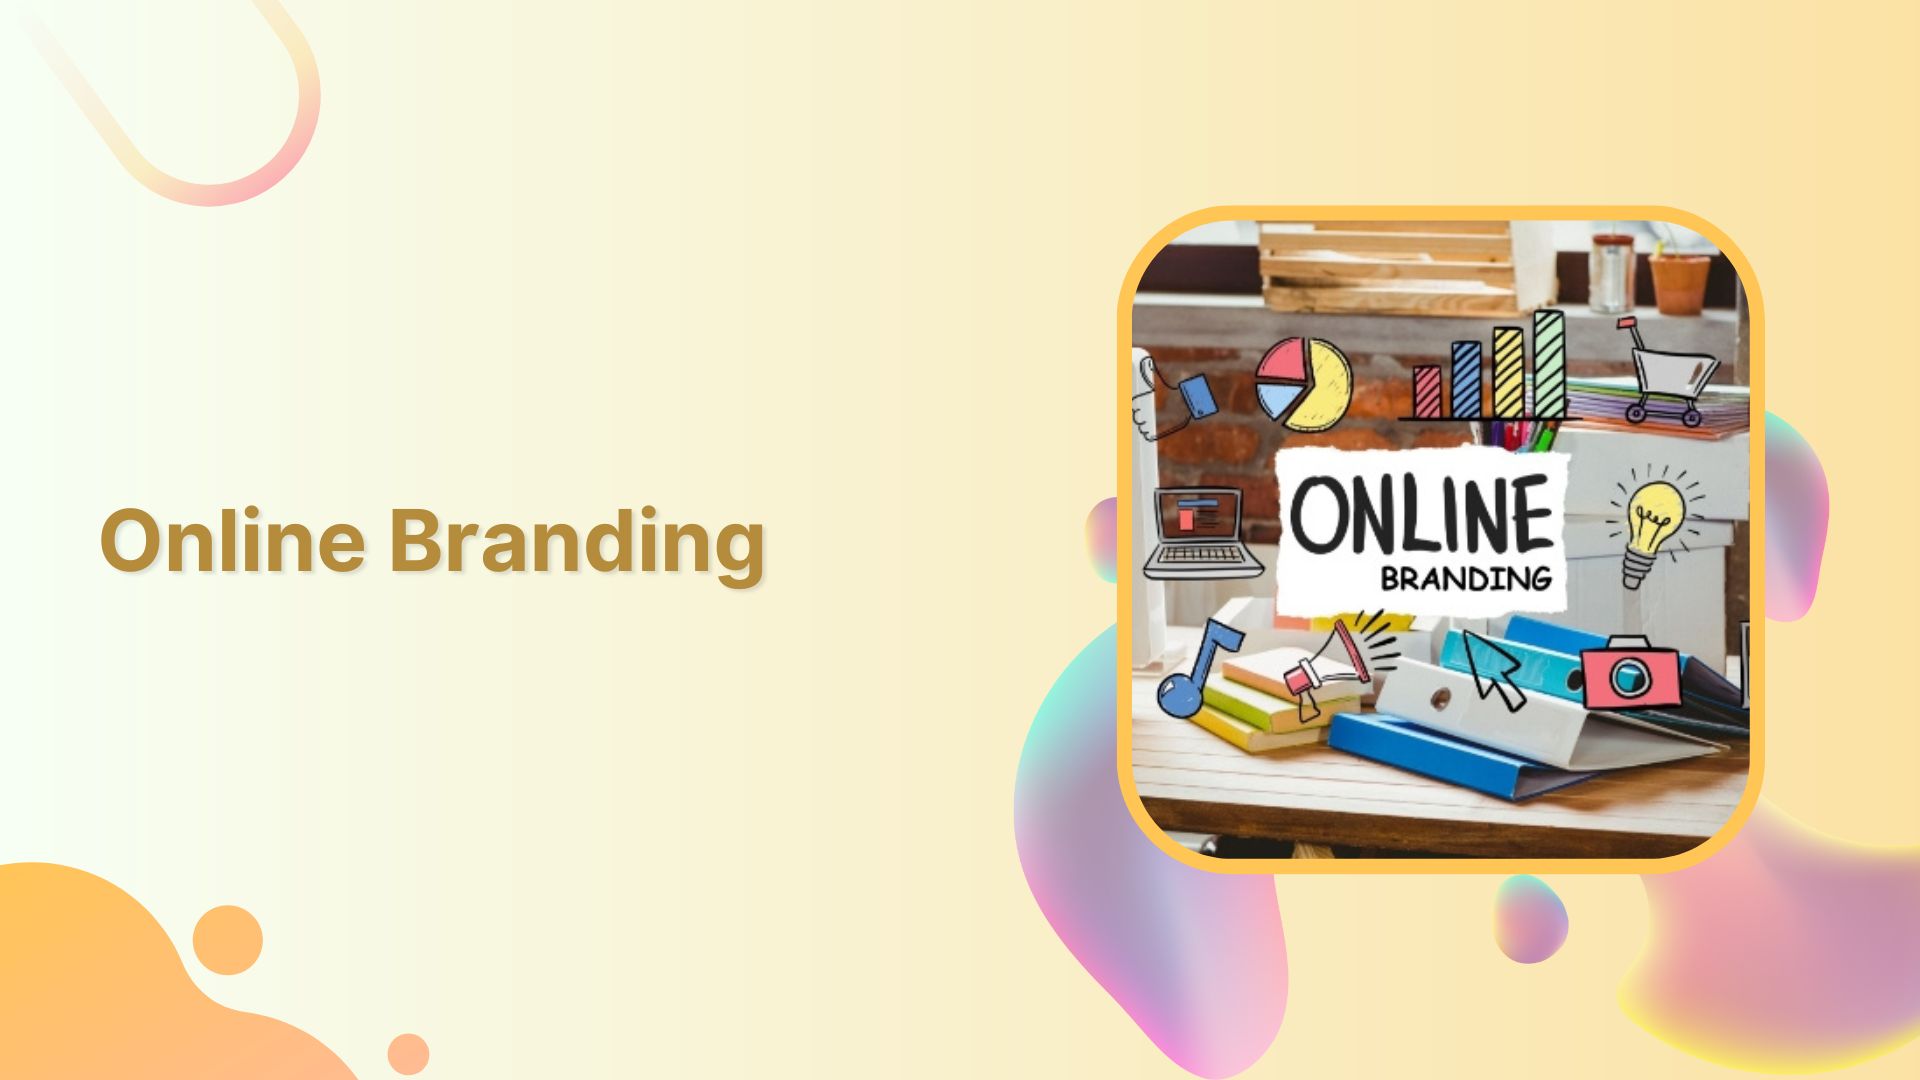 Online Branding: The Roadmap to Stand Out and Succeed Online